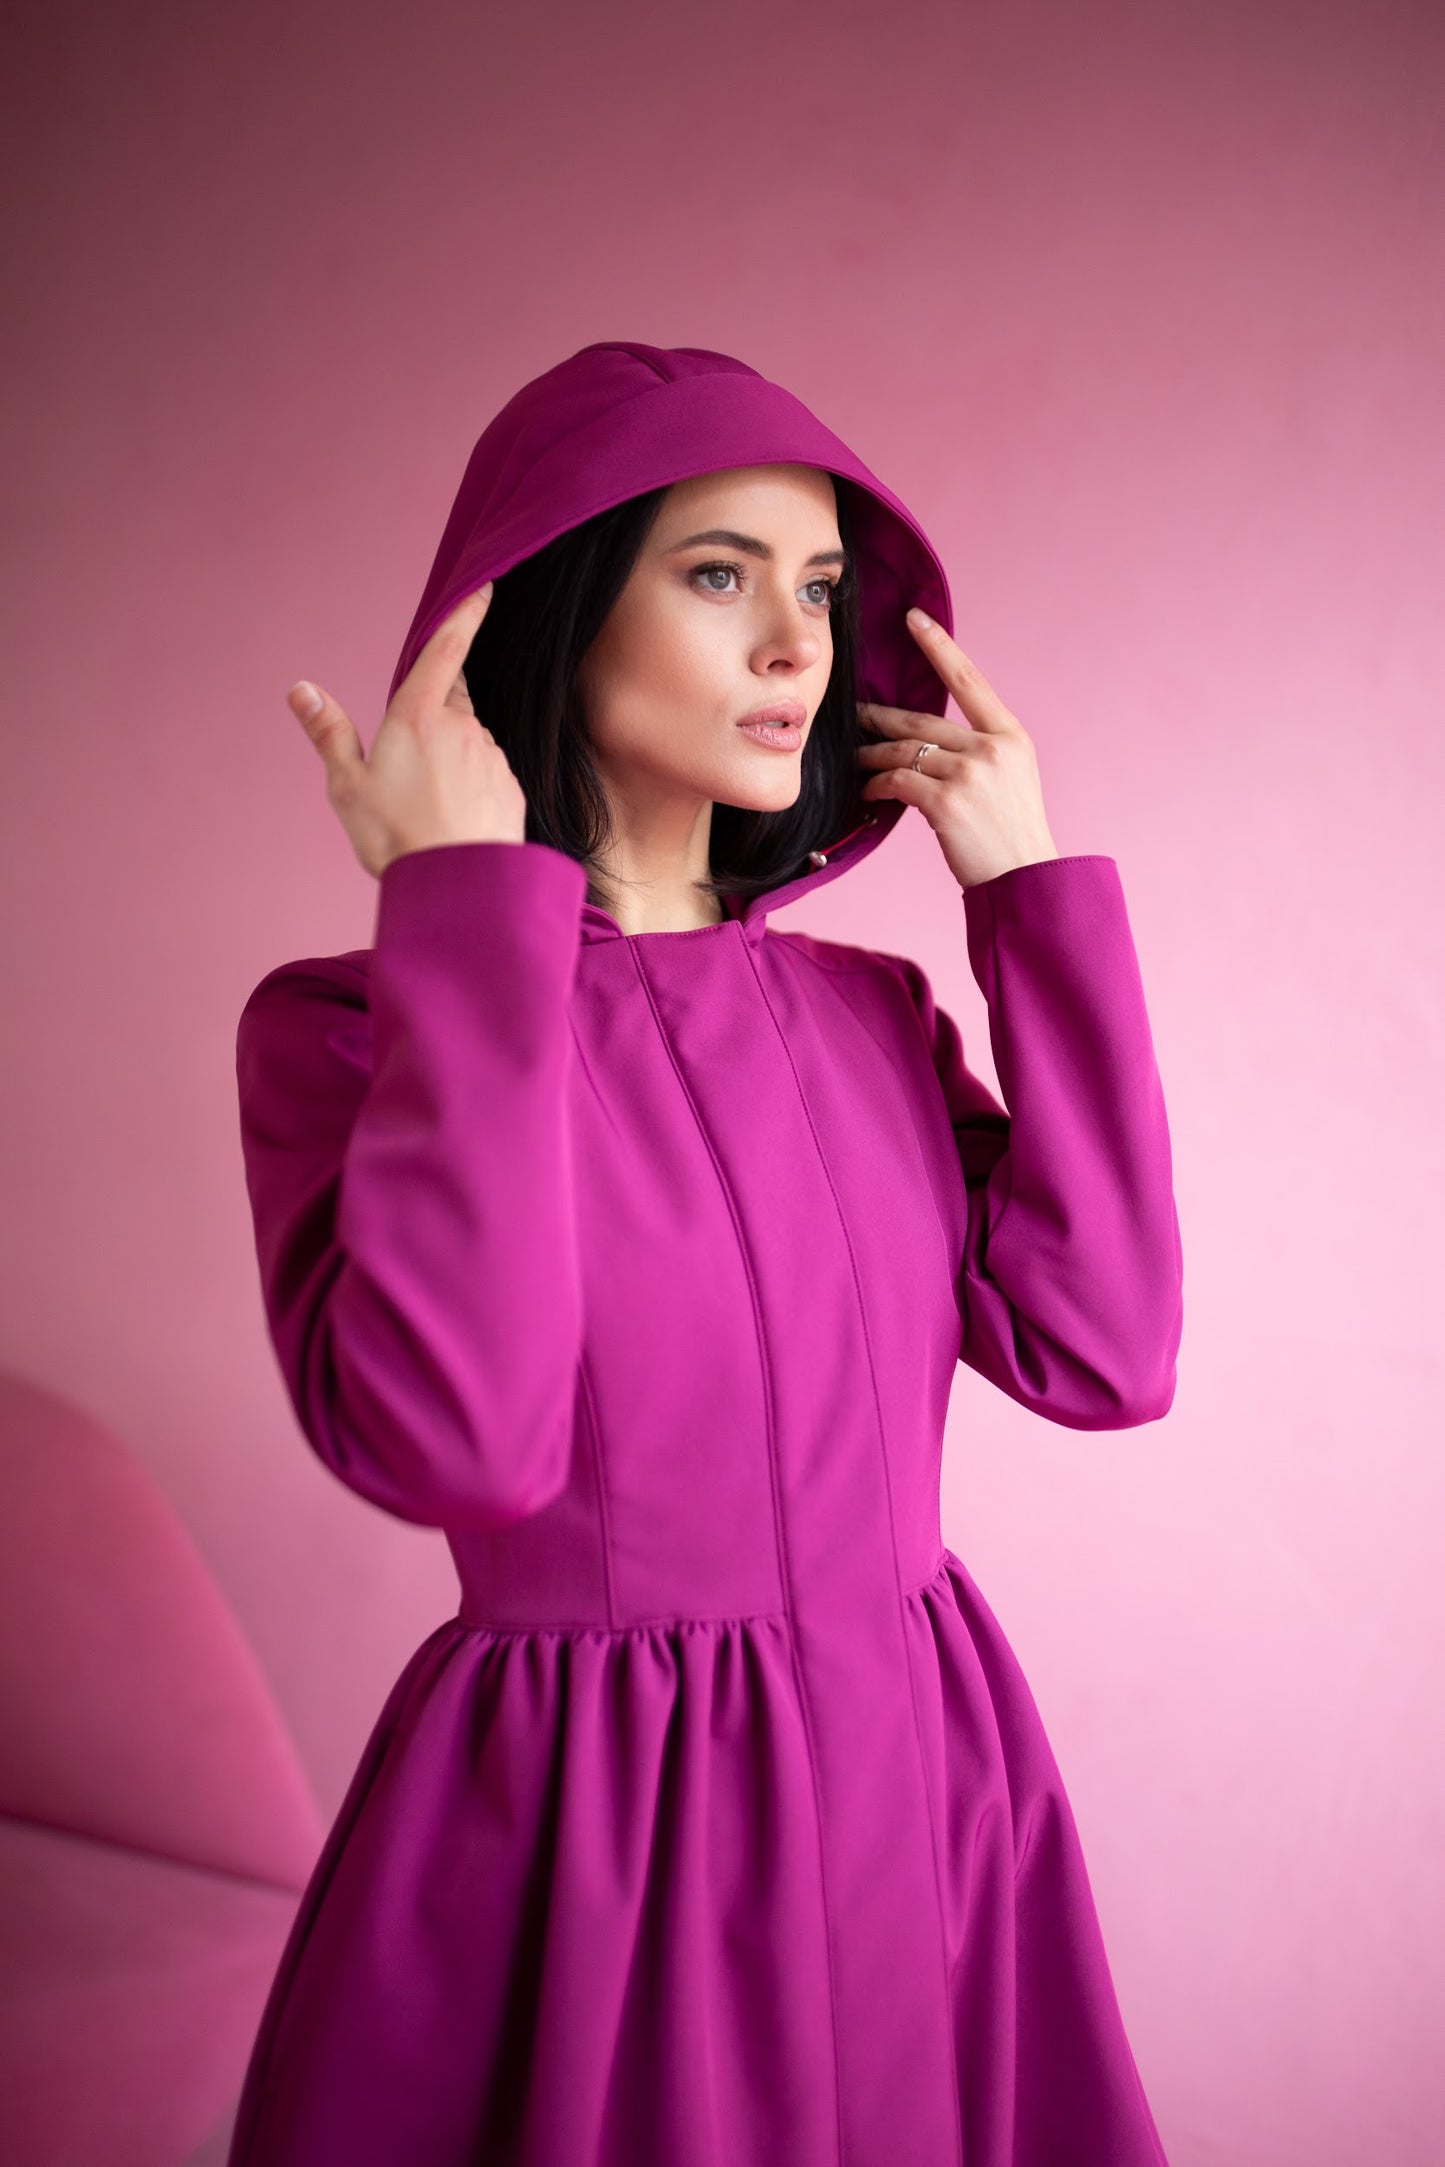 Hooded bright pink waterproof coat with fitted top